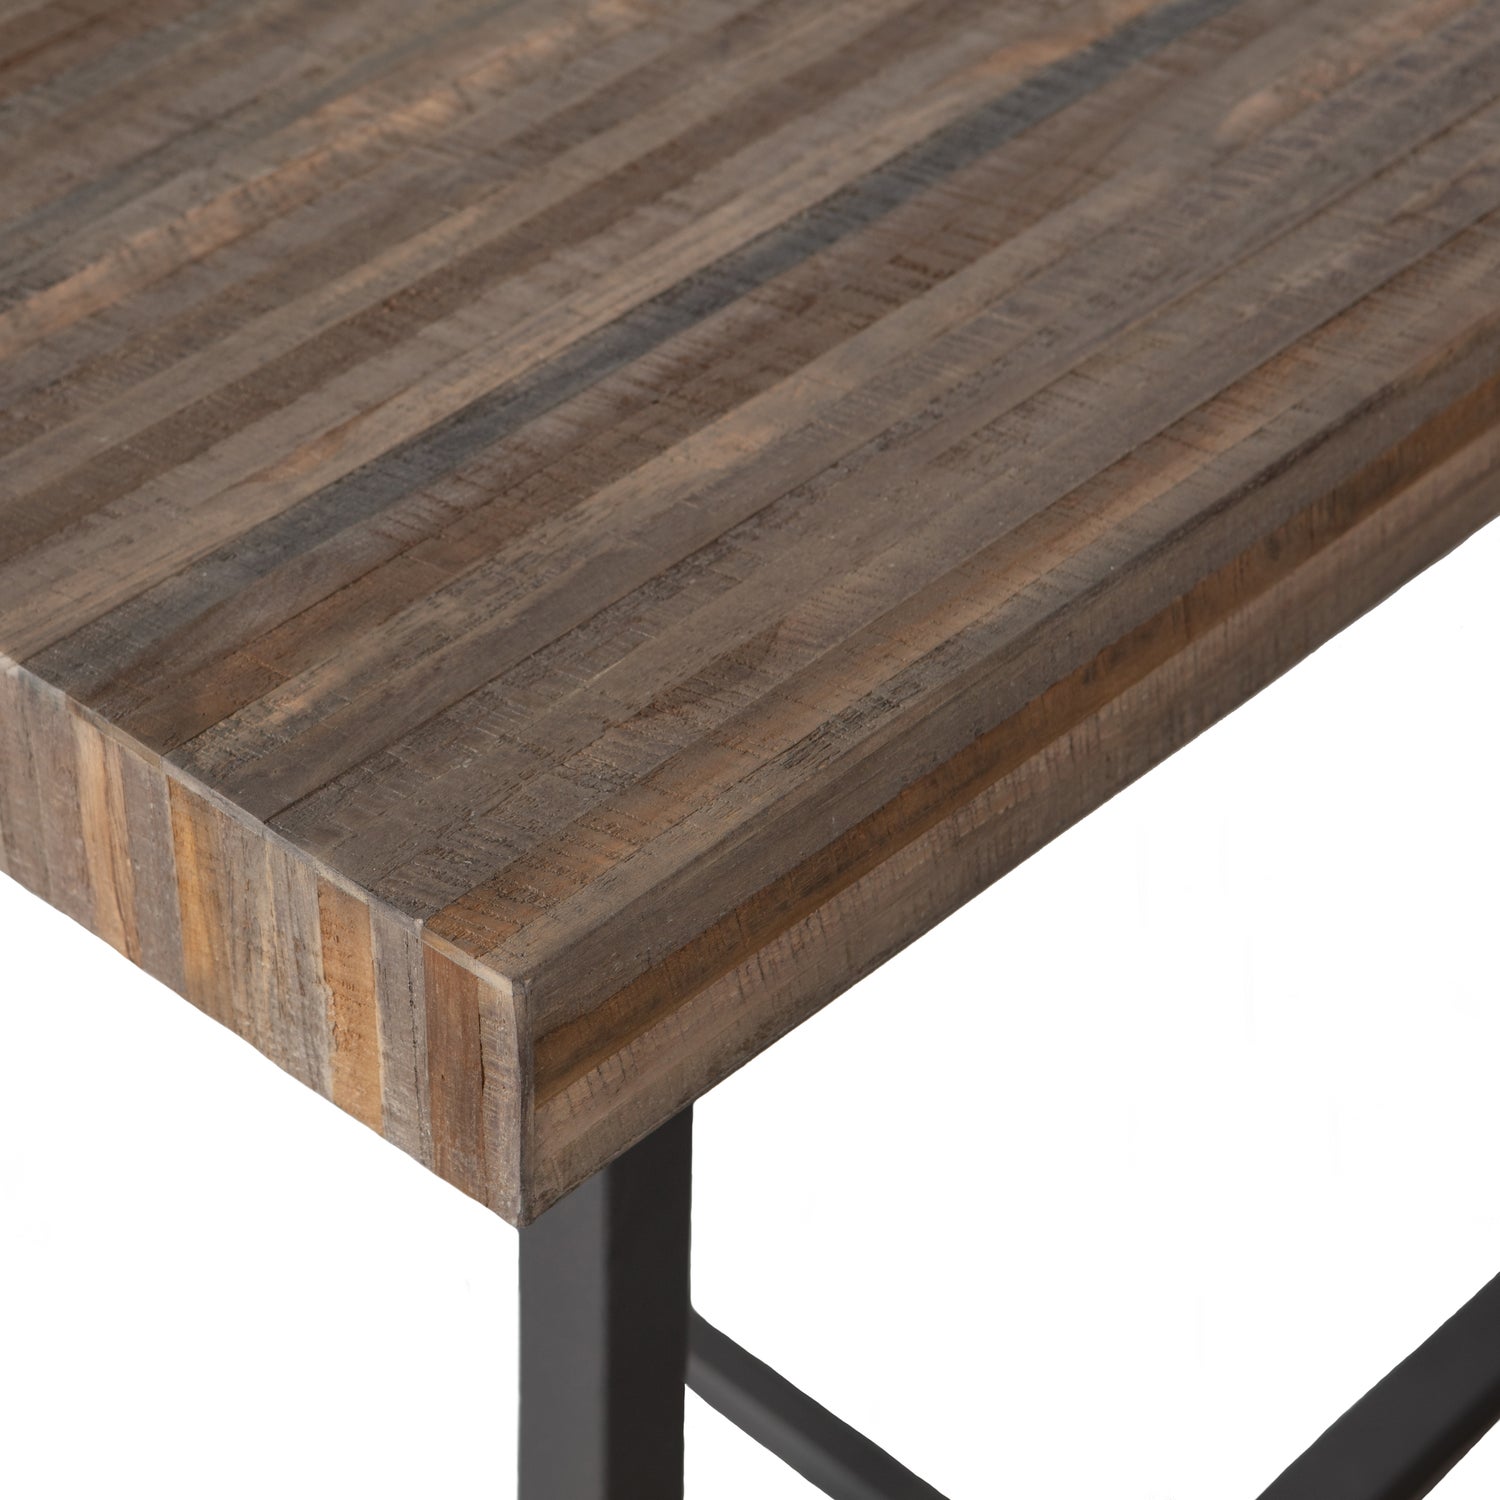 373924-N-01_VS_WE_Maxime_eettafel_recycled_hout_naturel_220x90cm_detail.jpg?auto=webp&format=png&width=1500&height=1500